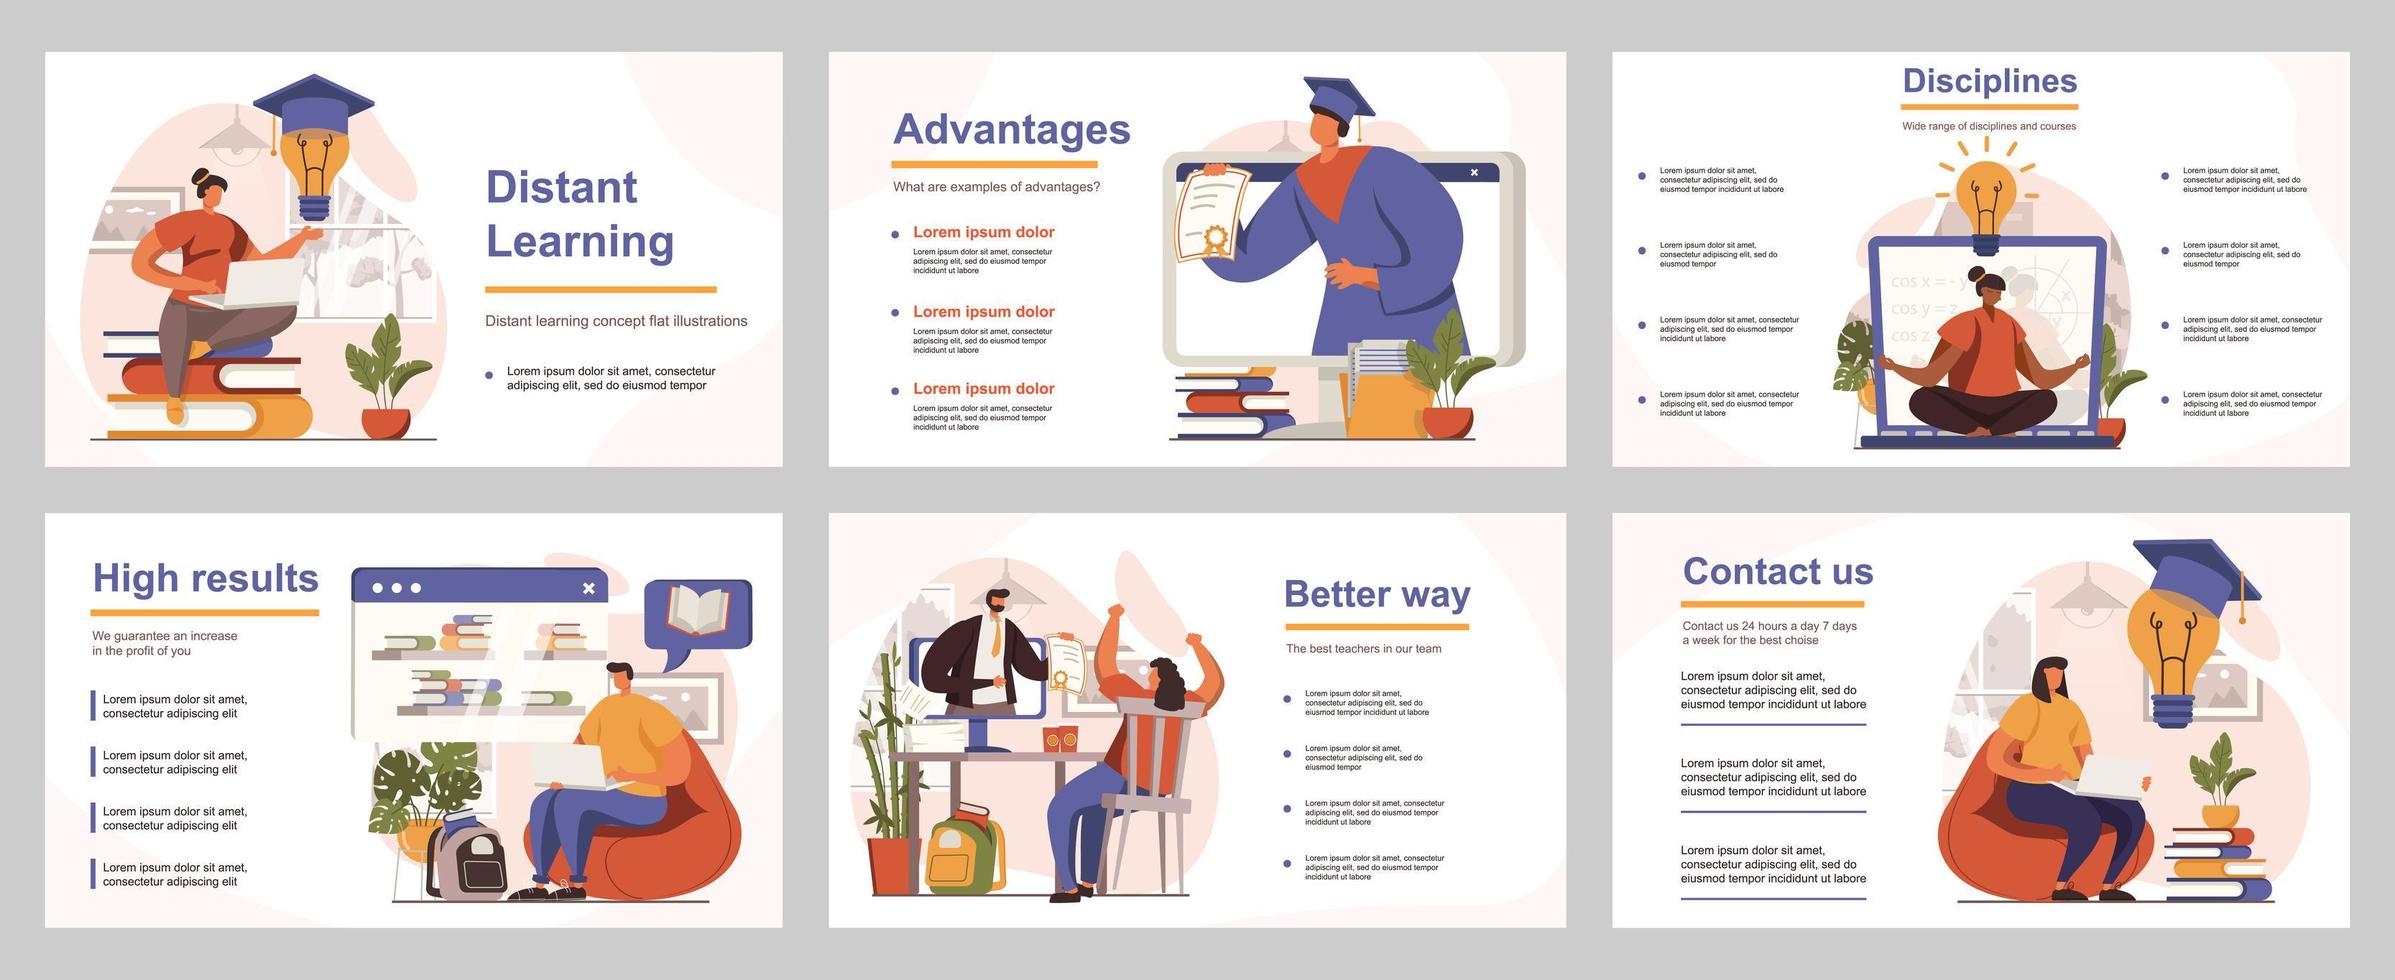 Distant learning concept for presentation slide template. People studying online, students watch webinars and video lessons, take courses. Vector illustration with flat persons for layout design